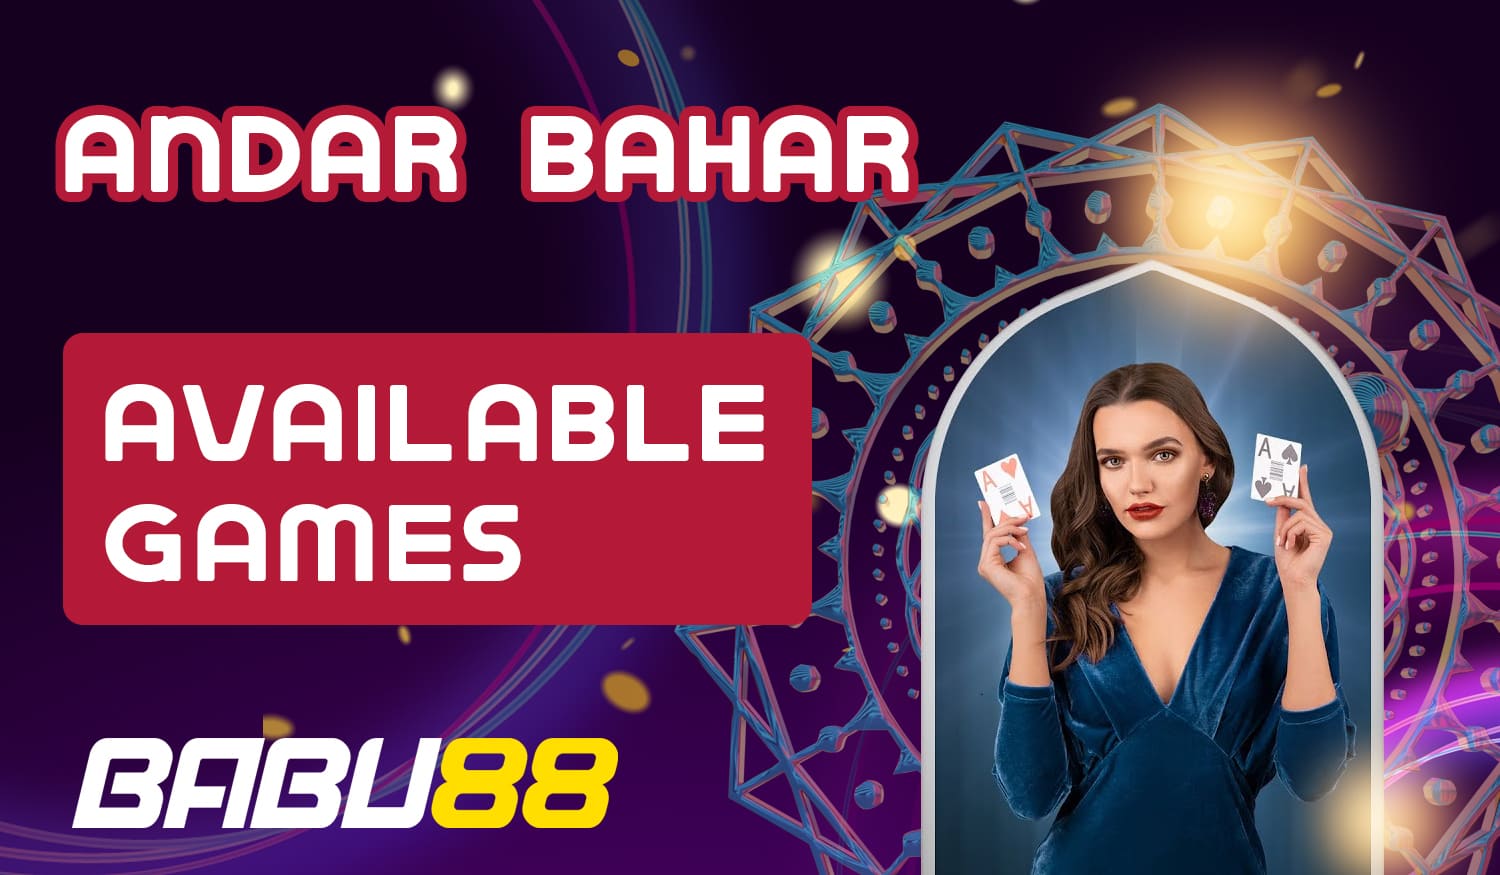 What varieties of Andar Bahar offers Babu88 users of the site